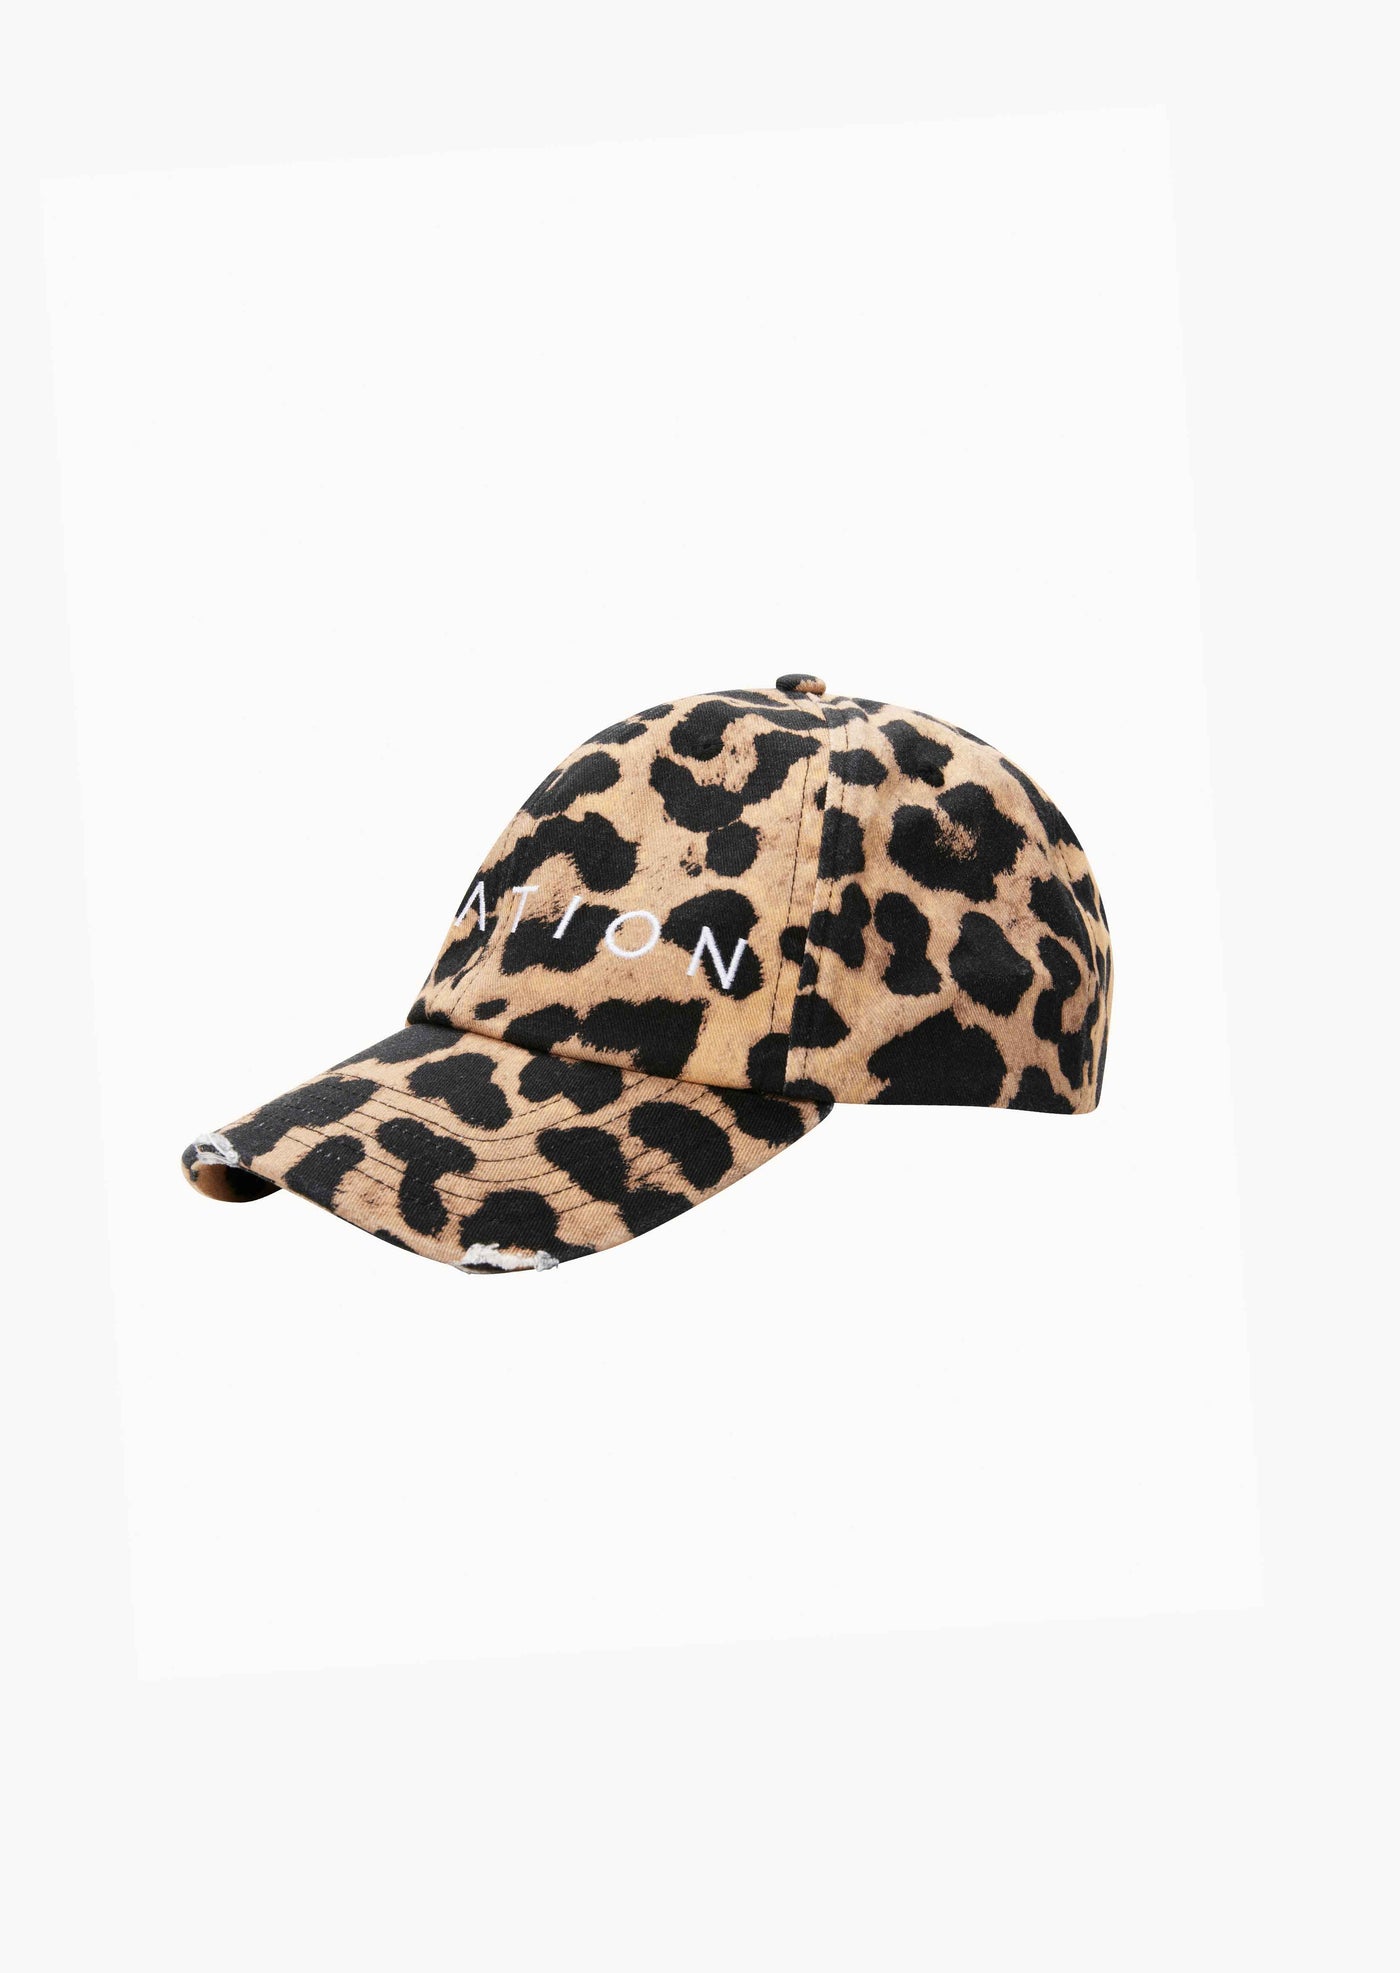 DOWNFORCE IMMERSION CAP IN ANIMAL PRINT